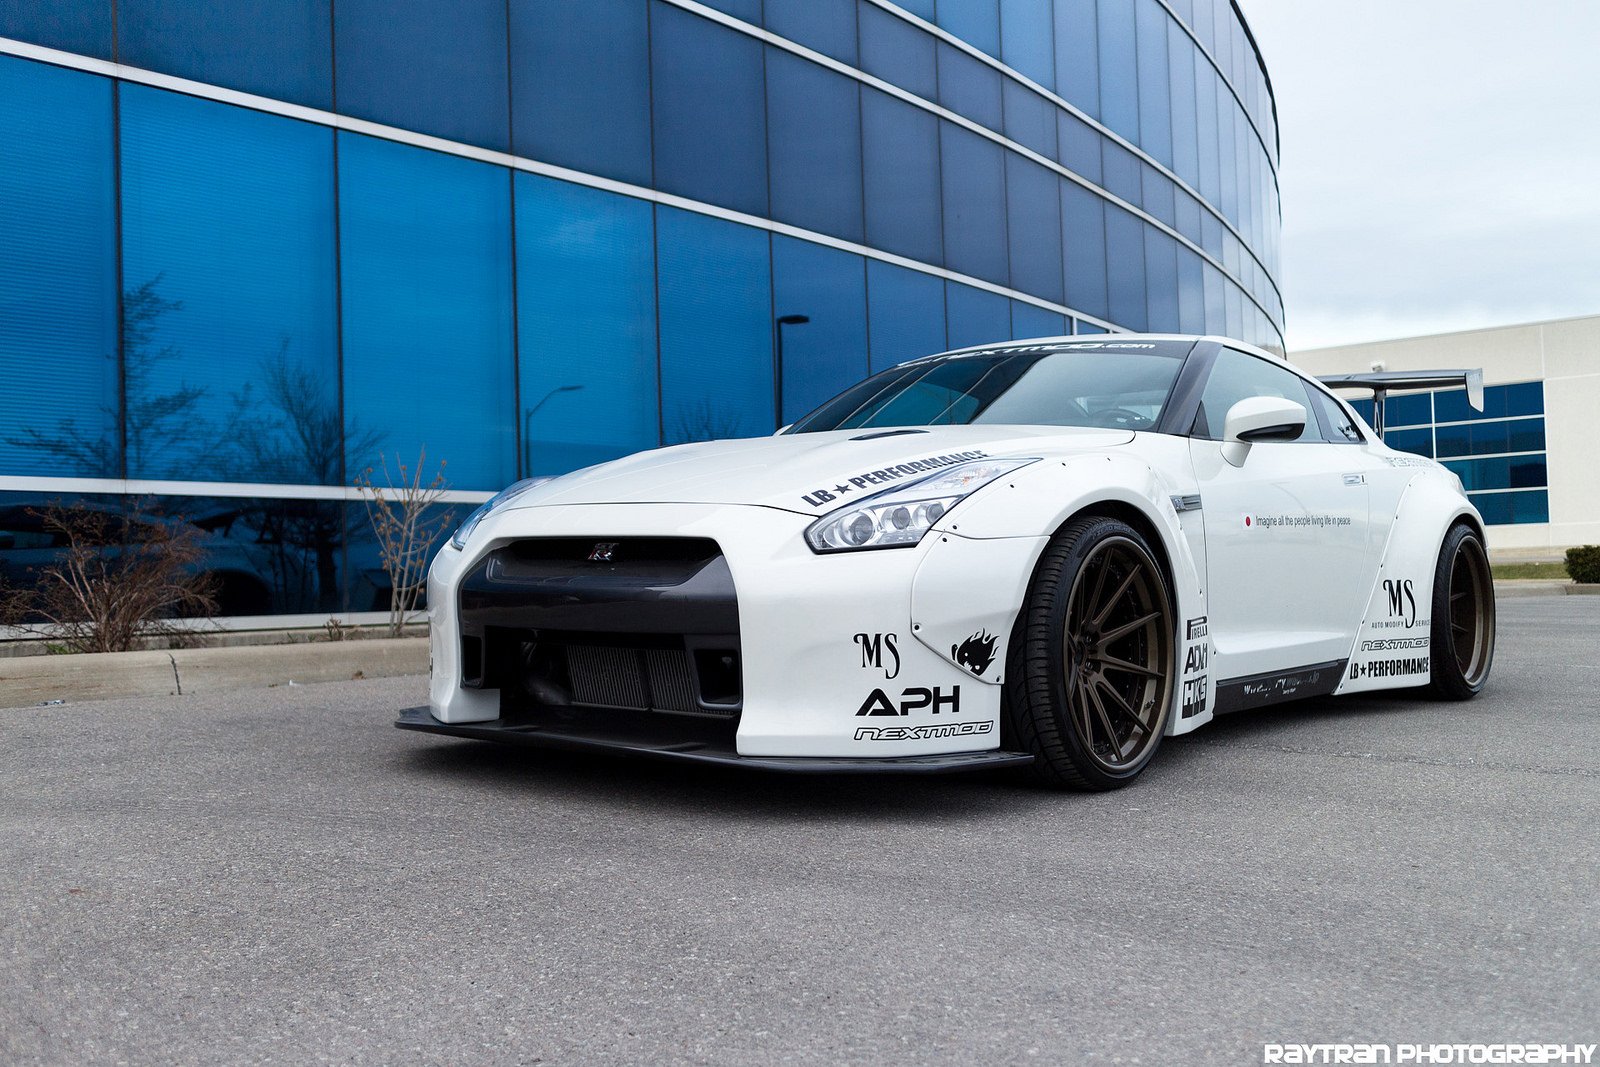 gt r, Nismo, Nissan, R35, Tuning, Supercar, Coupe, Japan, Cars, Blanc ...